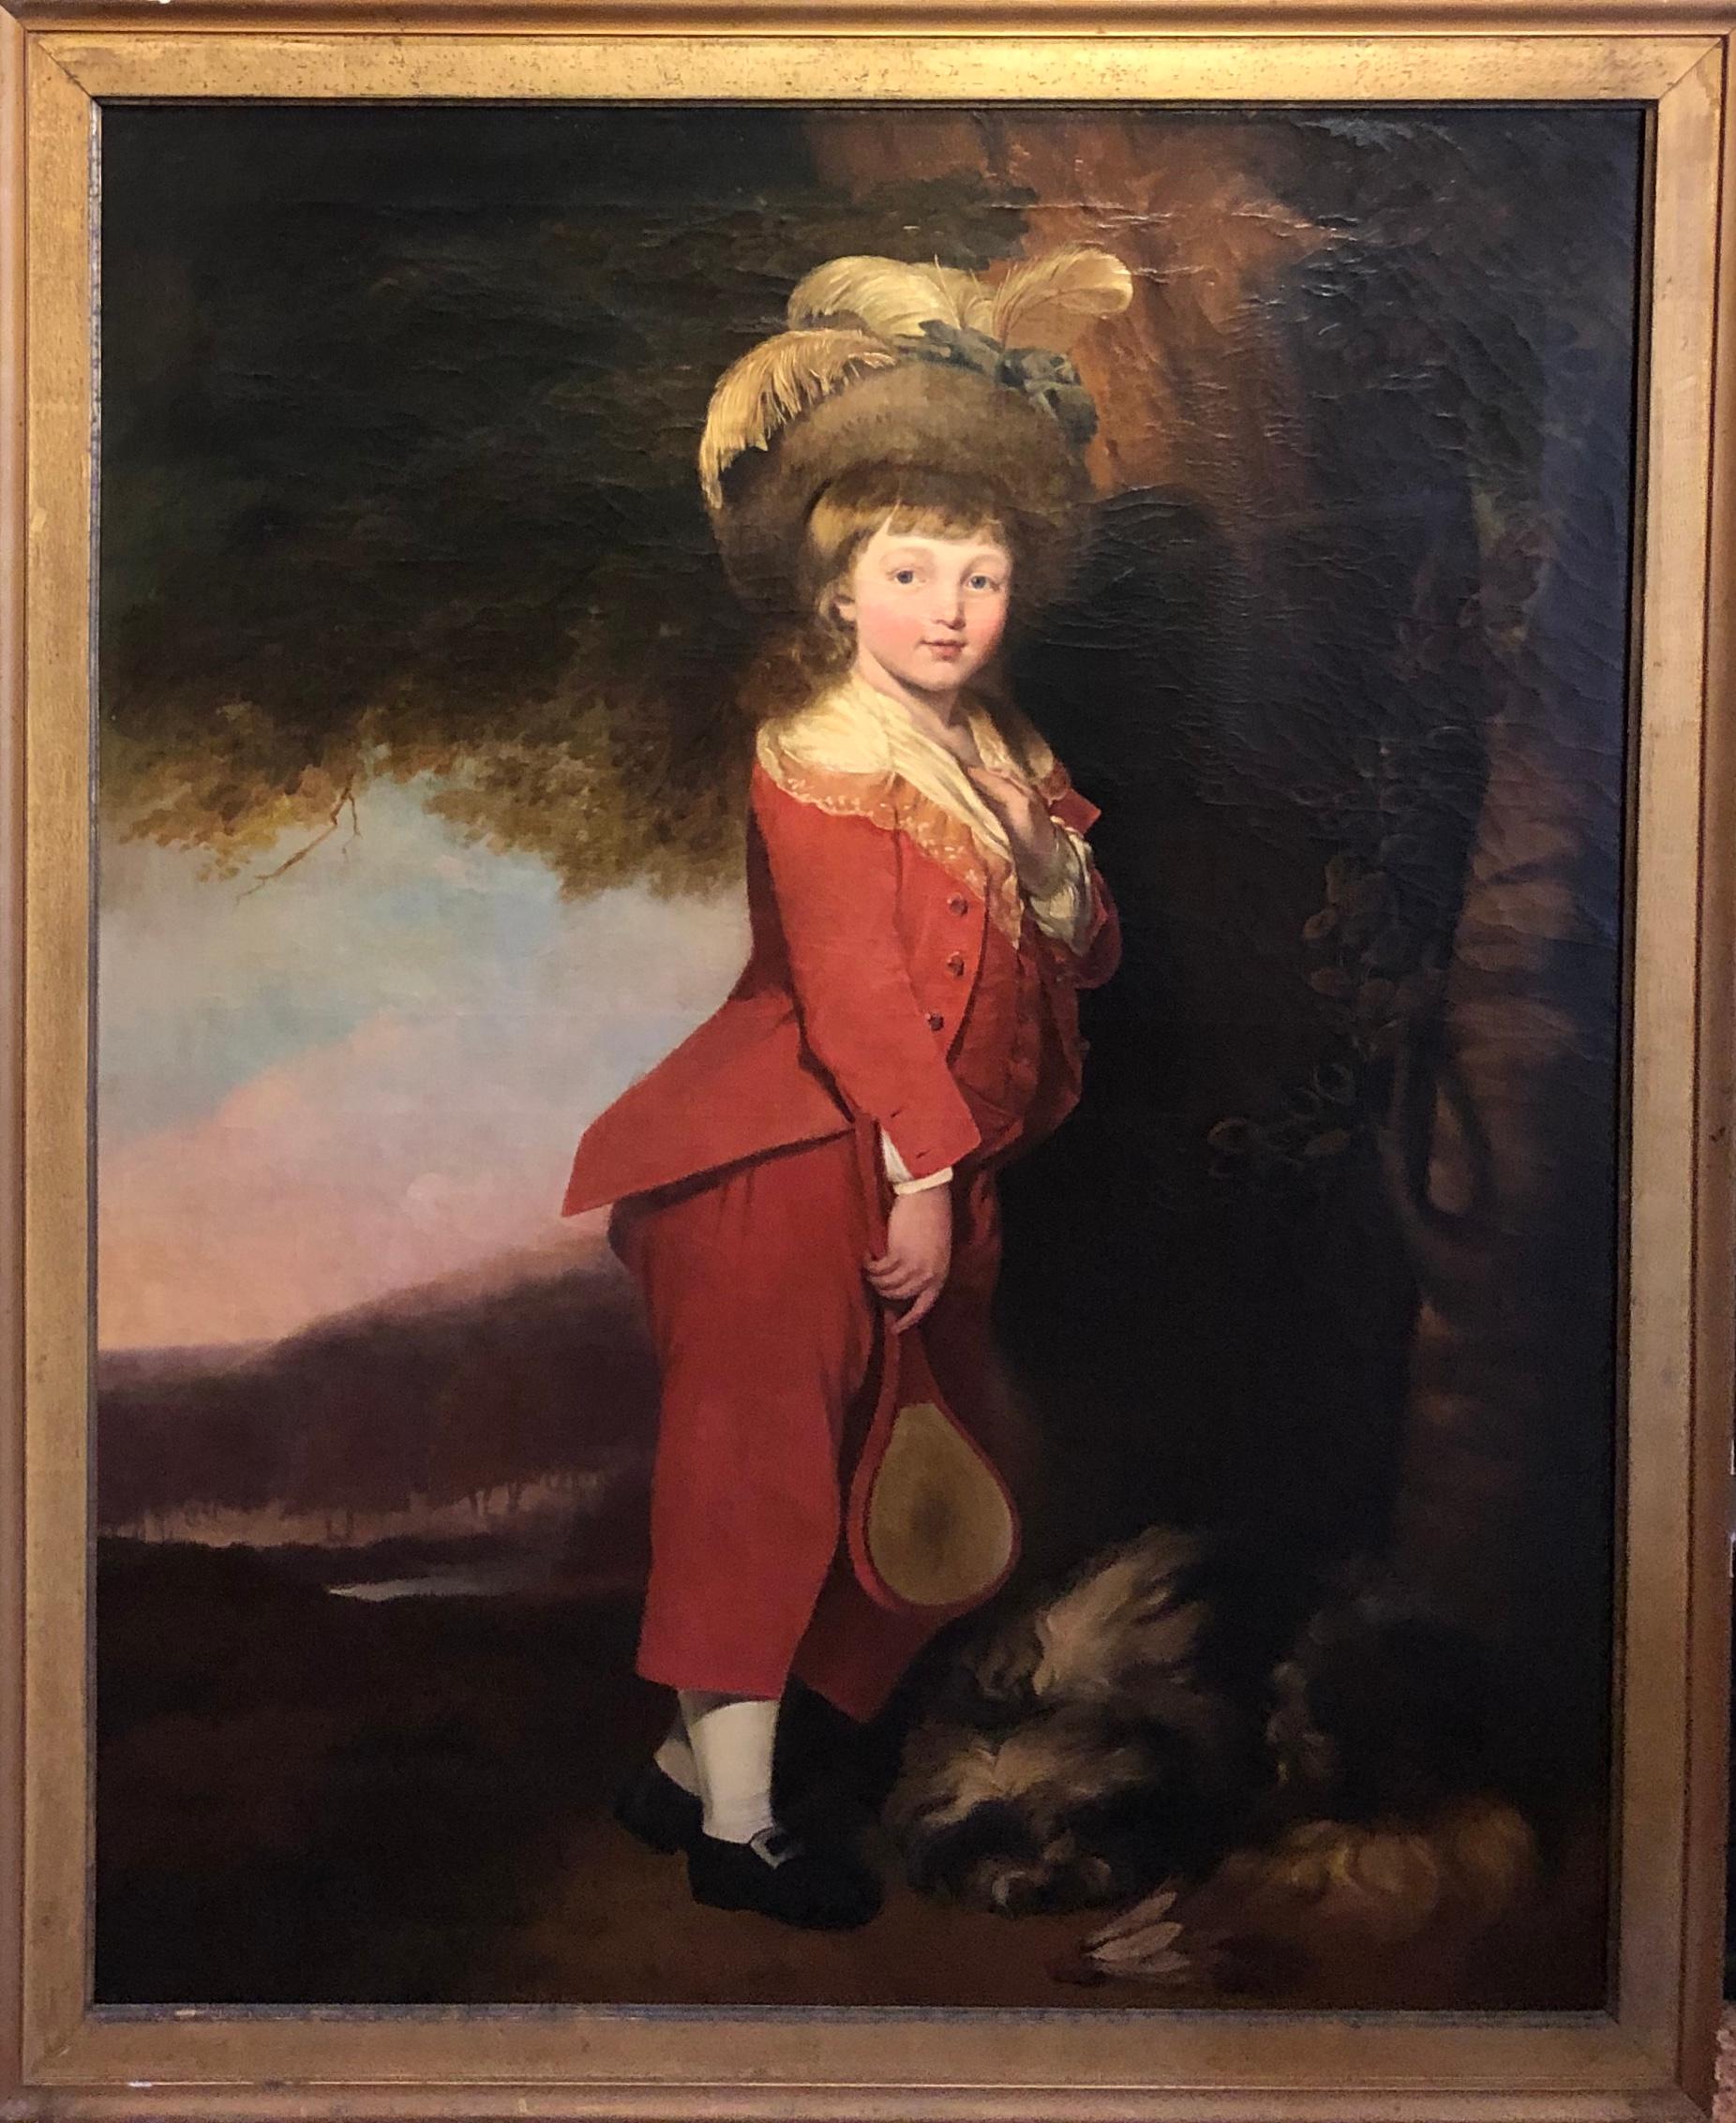 Unknown Portrait Painting - A Large Full-Length Portrait of a Boy in Red with Badminton Paraphernalia